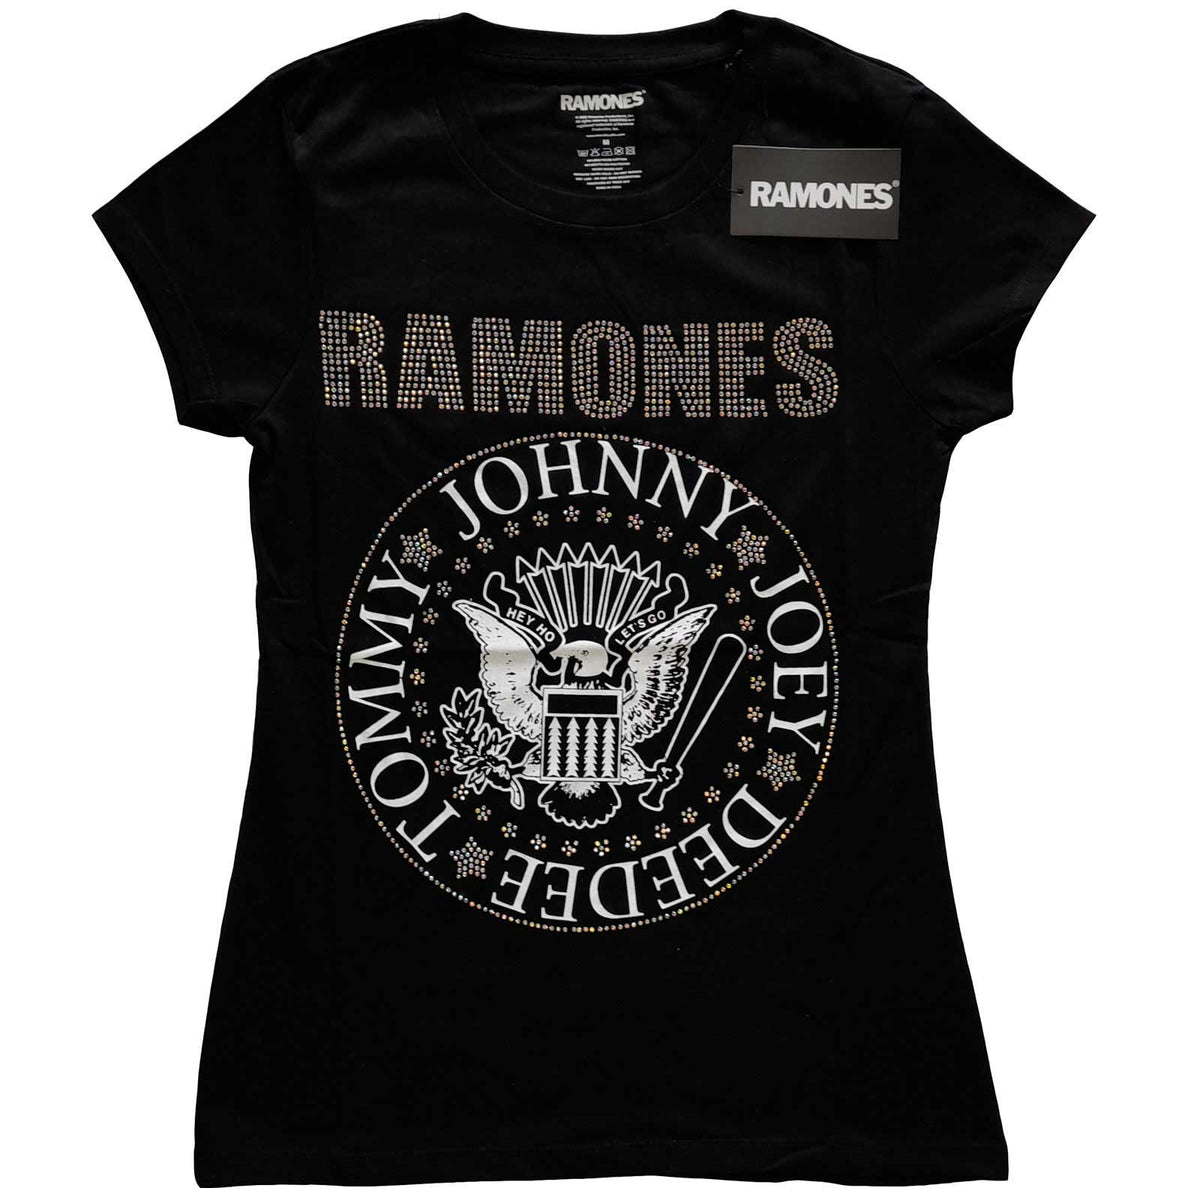 The Ramones Ladies T-Shirt - Presidential Seal Diamante - Conception sous licence officielle